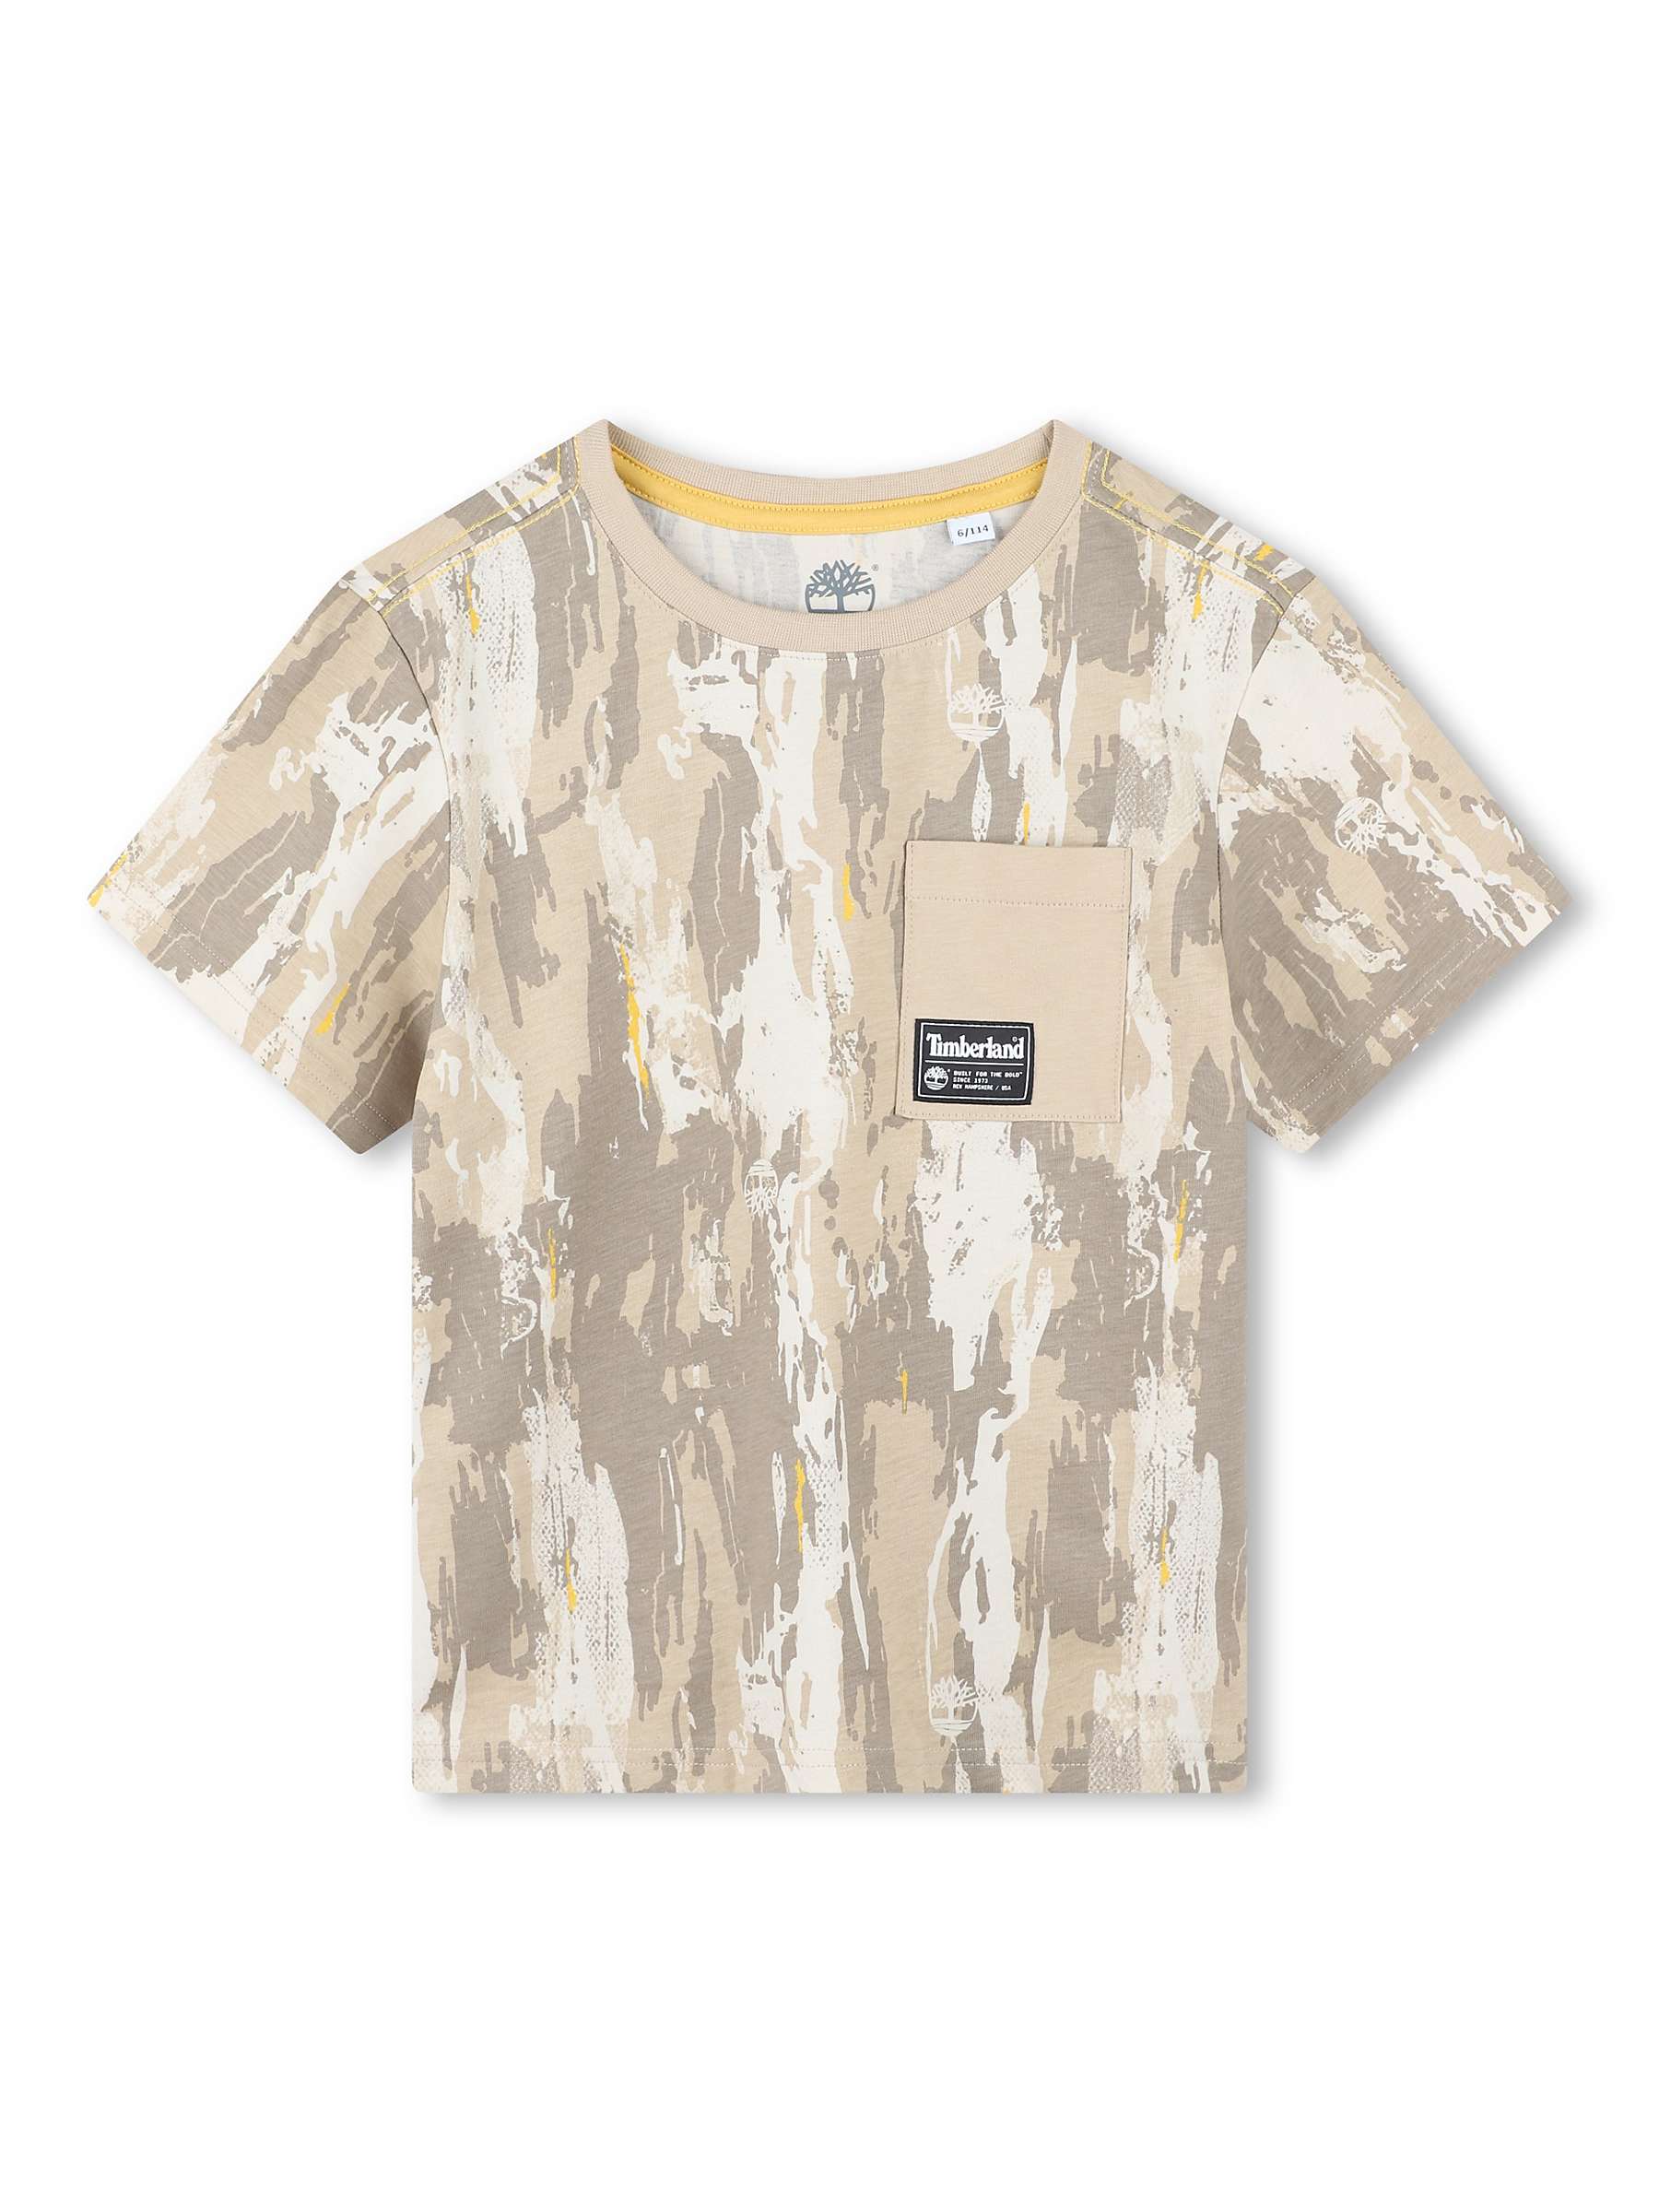 Buy Timberland Kids' Fancy Logo Abstract Print T-Shirt, Natural Online at johnlewis.com